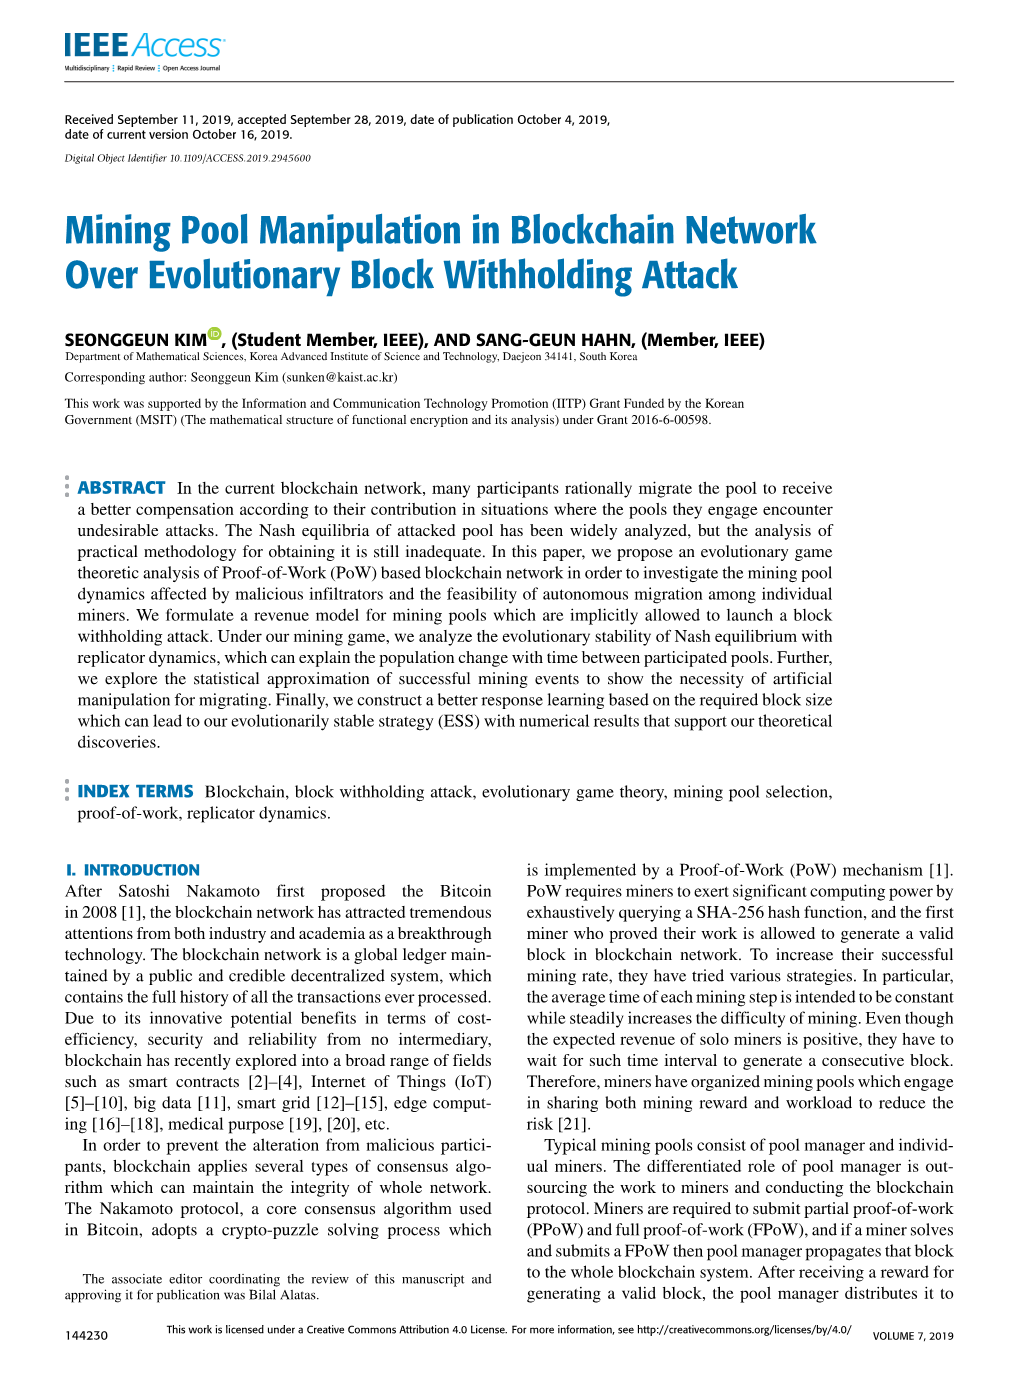 Mining Pool Manipulation in Blockchain Network Over Evolutionary Block Withholding Attack